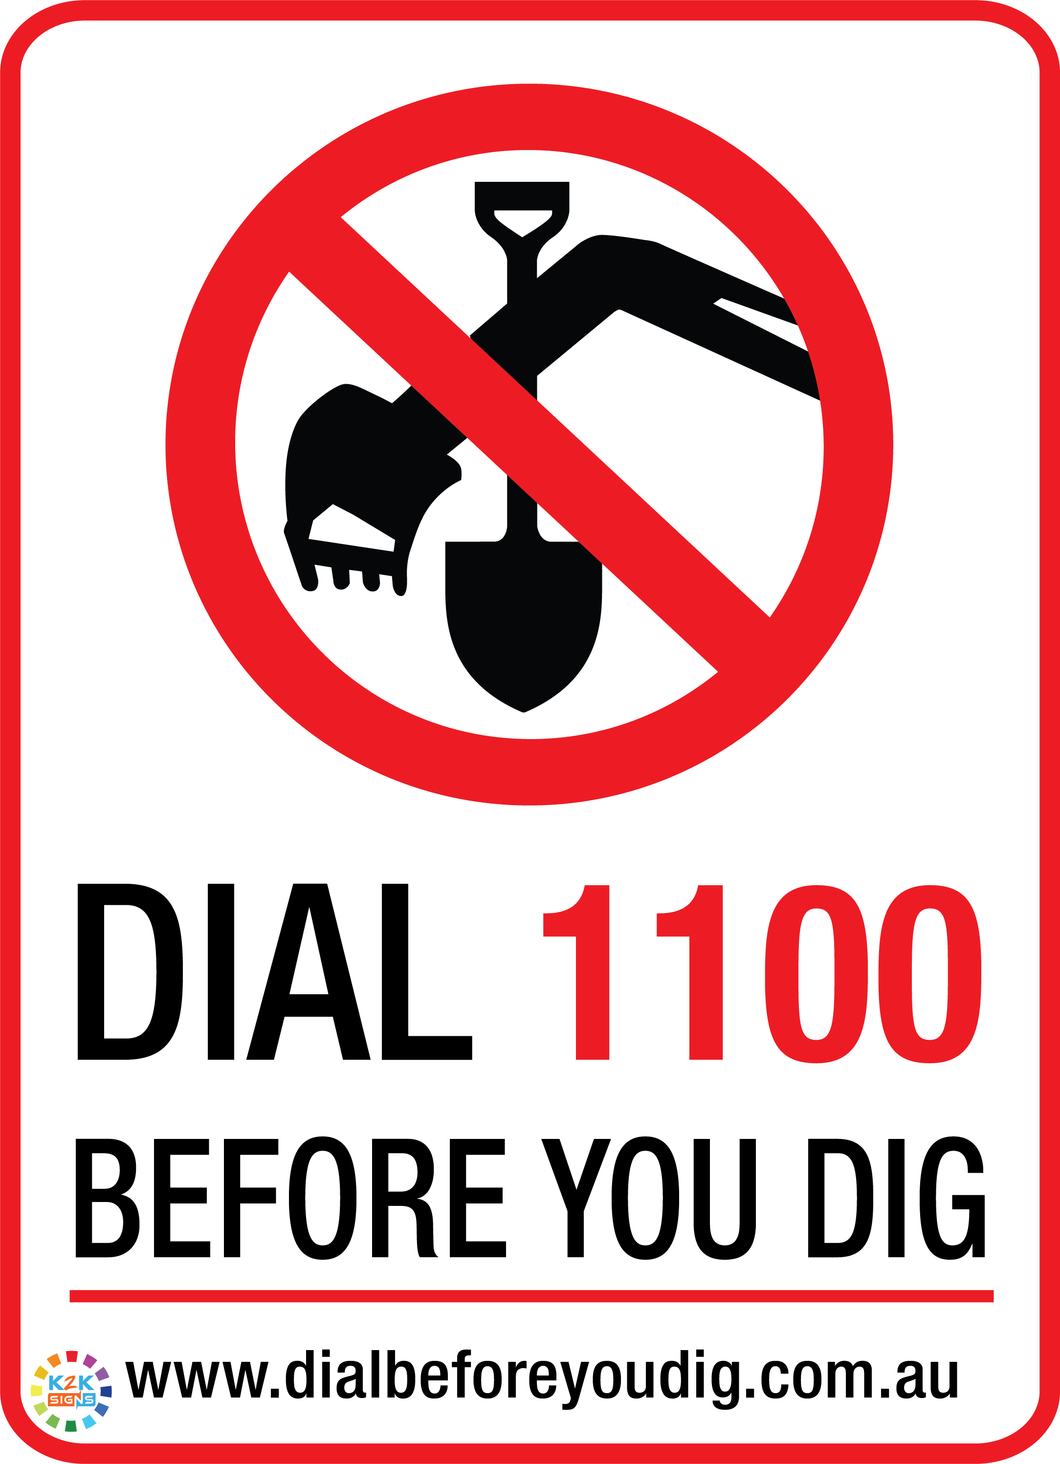 Dial 1100 Before You Dig Sign